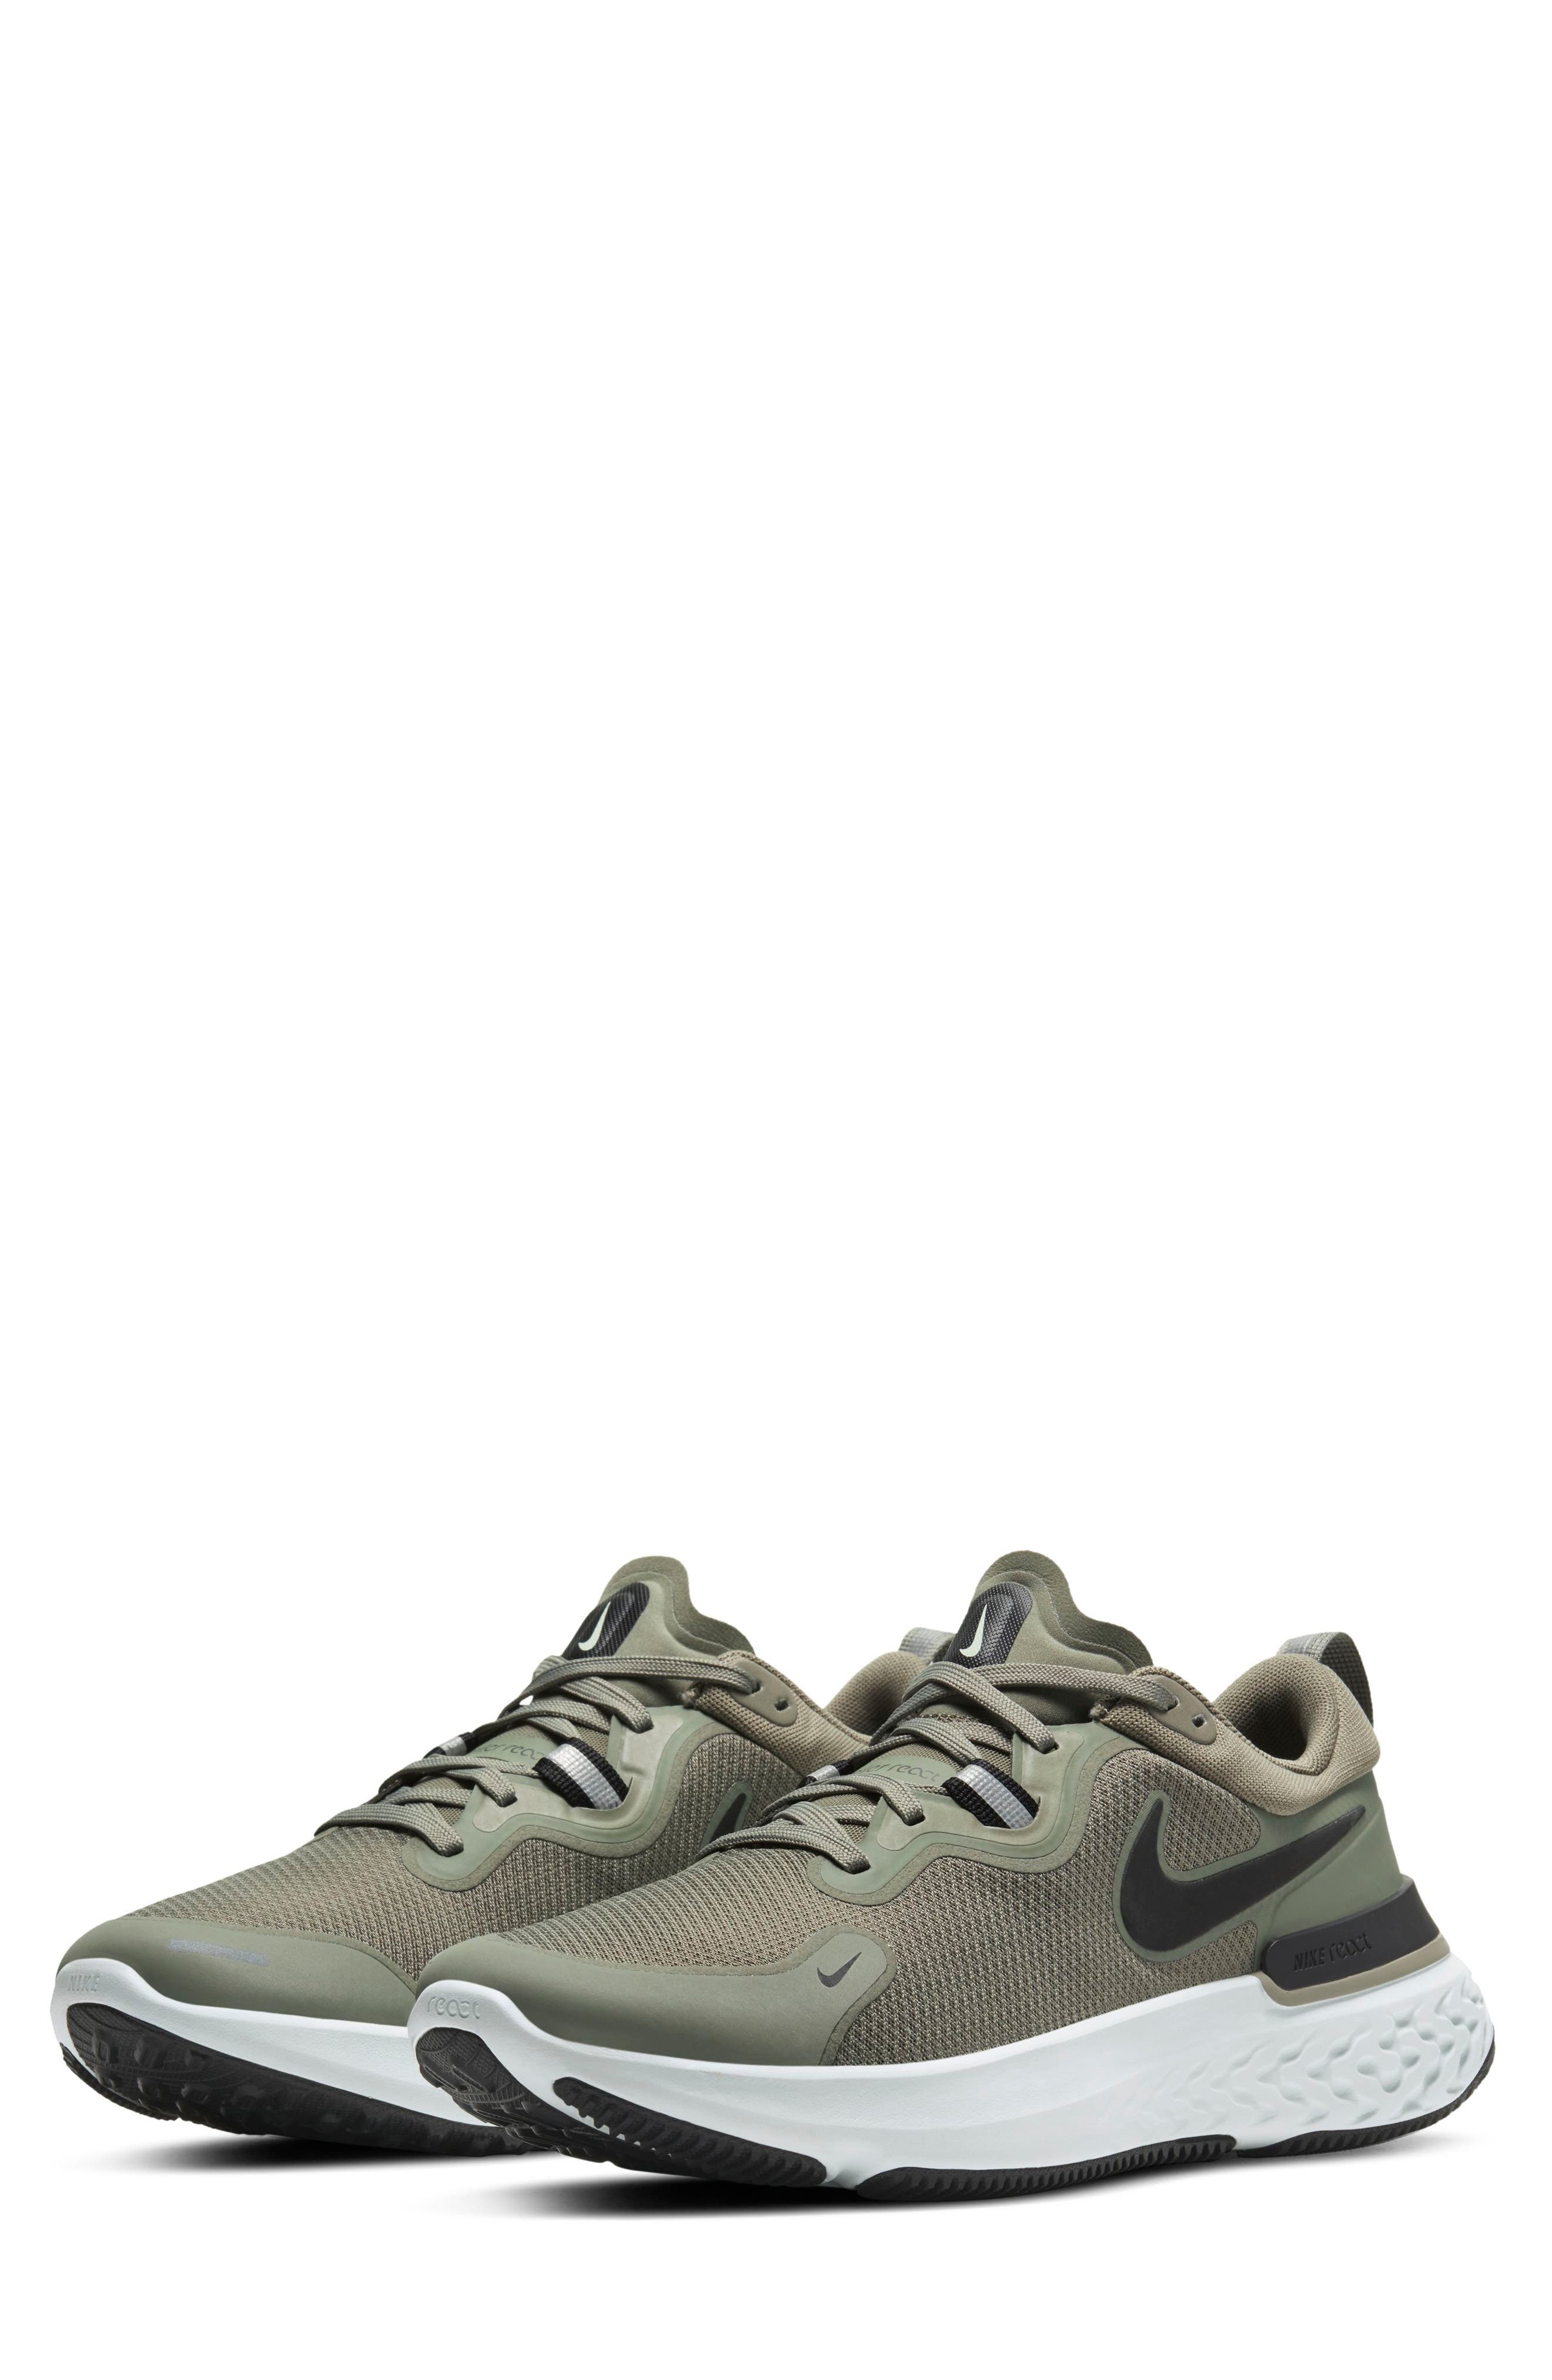 army green nike running shoes